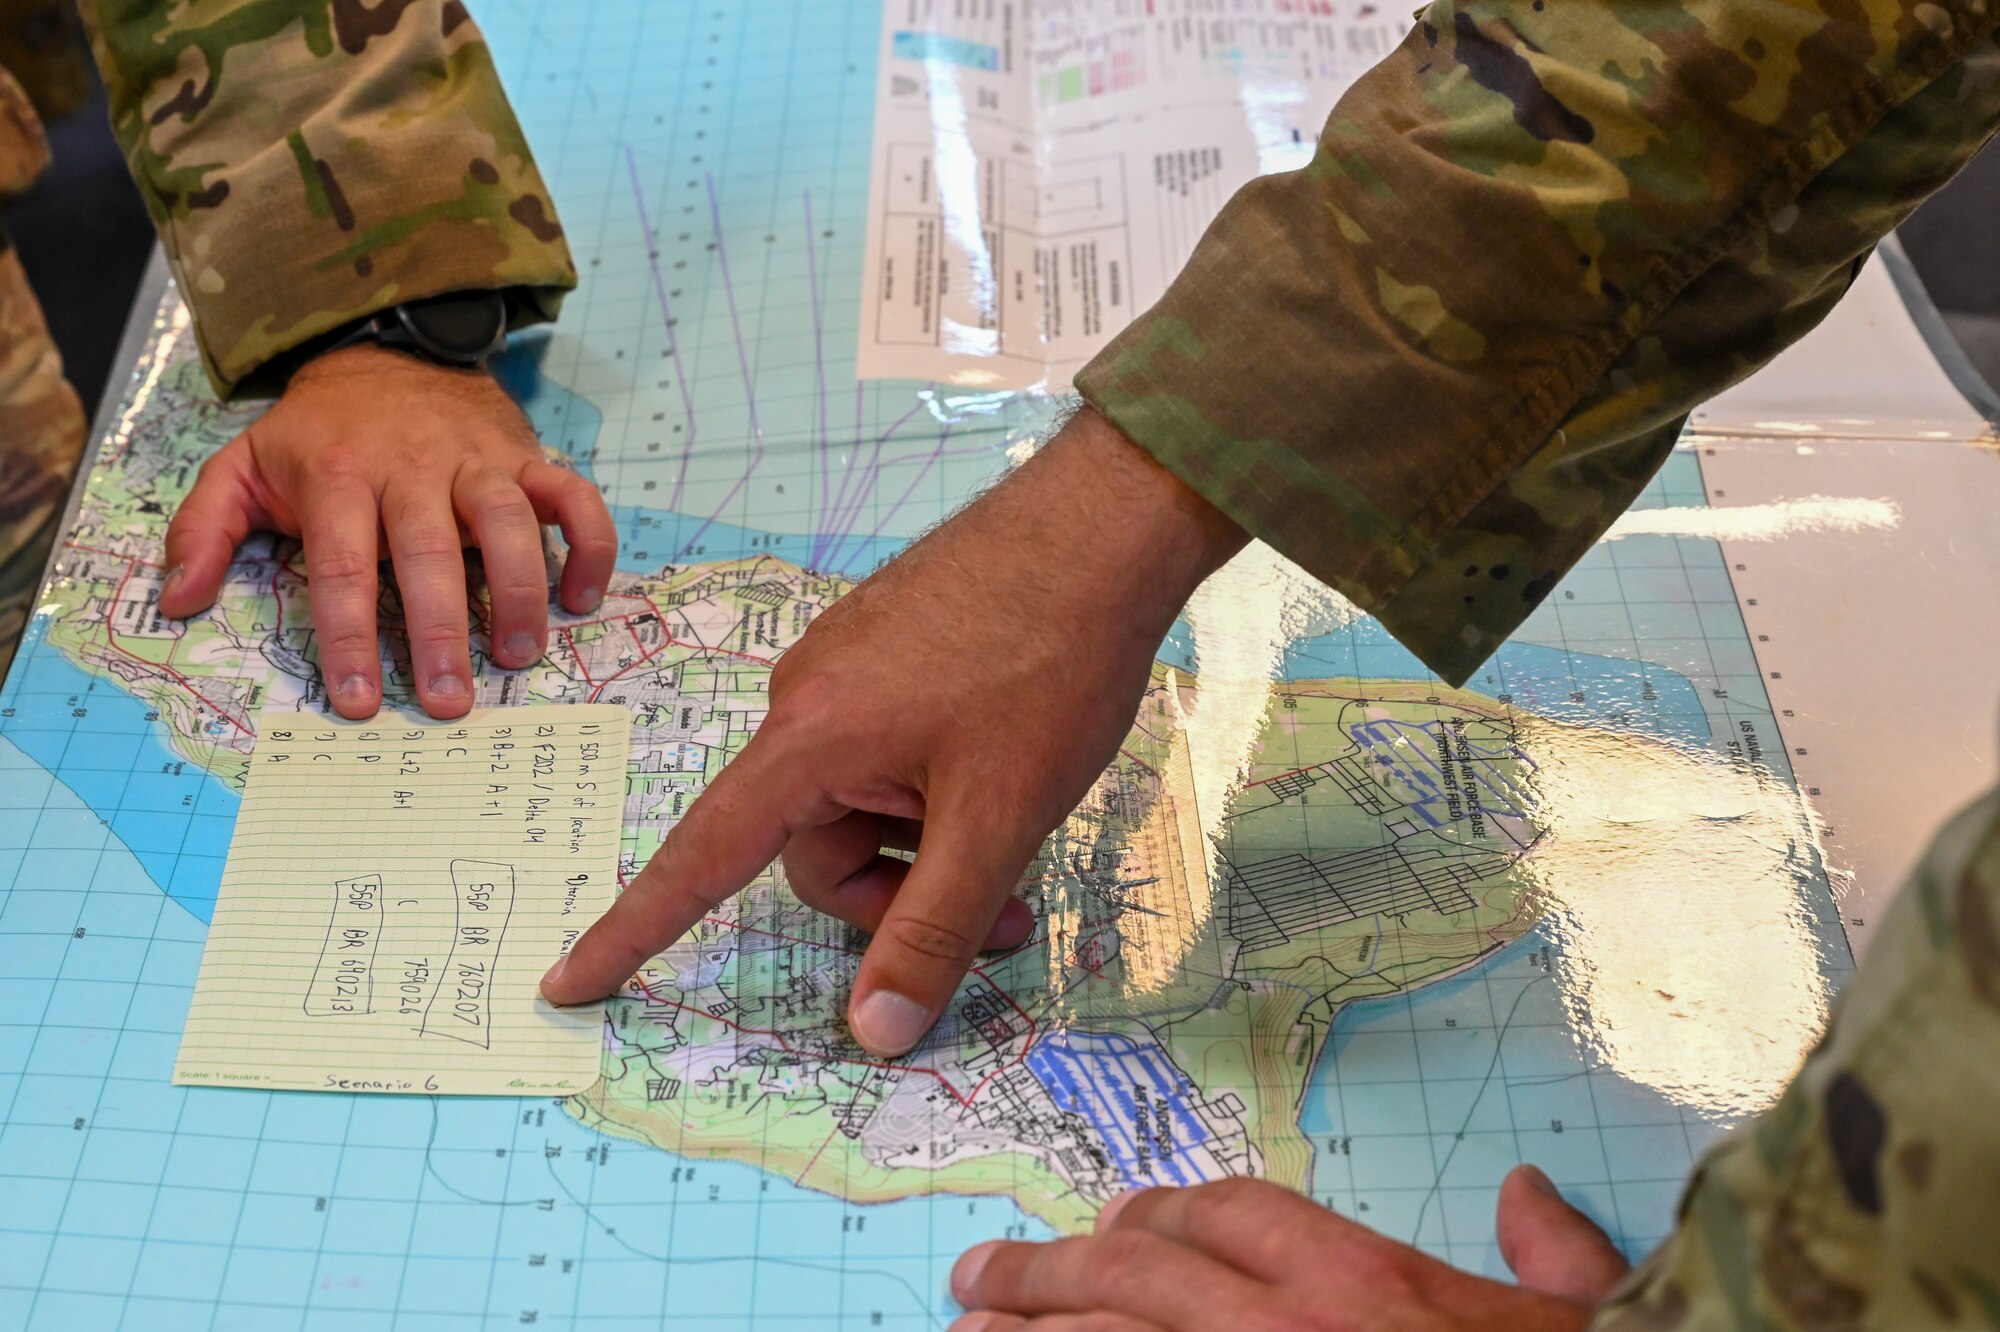 U.S. Air Force Airmen assigned to the 644th Combat Communications Squadron, use a map to plot coordinates during land navigation skills training on North West Field, Guam, April 9, 2021. Students spent three weeks learning various skills to help them in combat and survival during exercise Dragon Forge. Exercise DF is a combat skills training course that prepares participants to deploy to austere locations. (U.S. Air Force photo by Tech. Sgt. Esteban Esquivel)